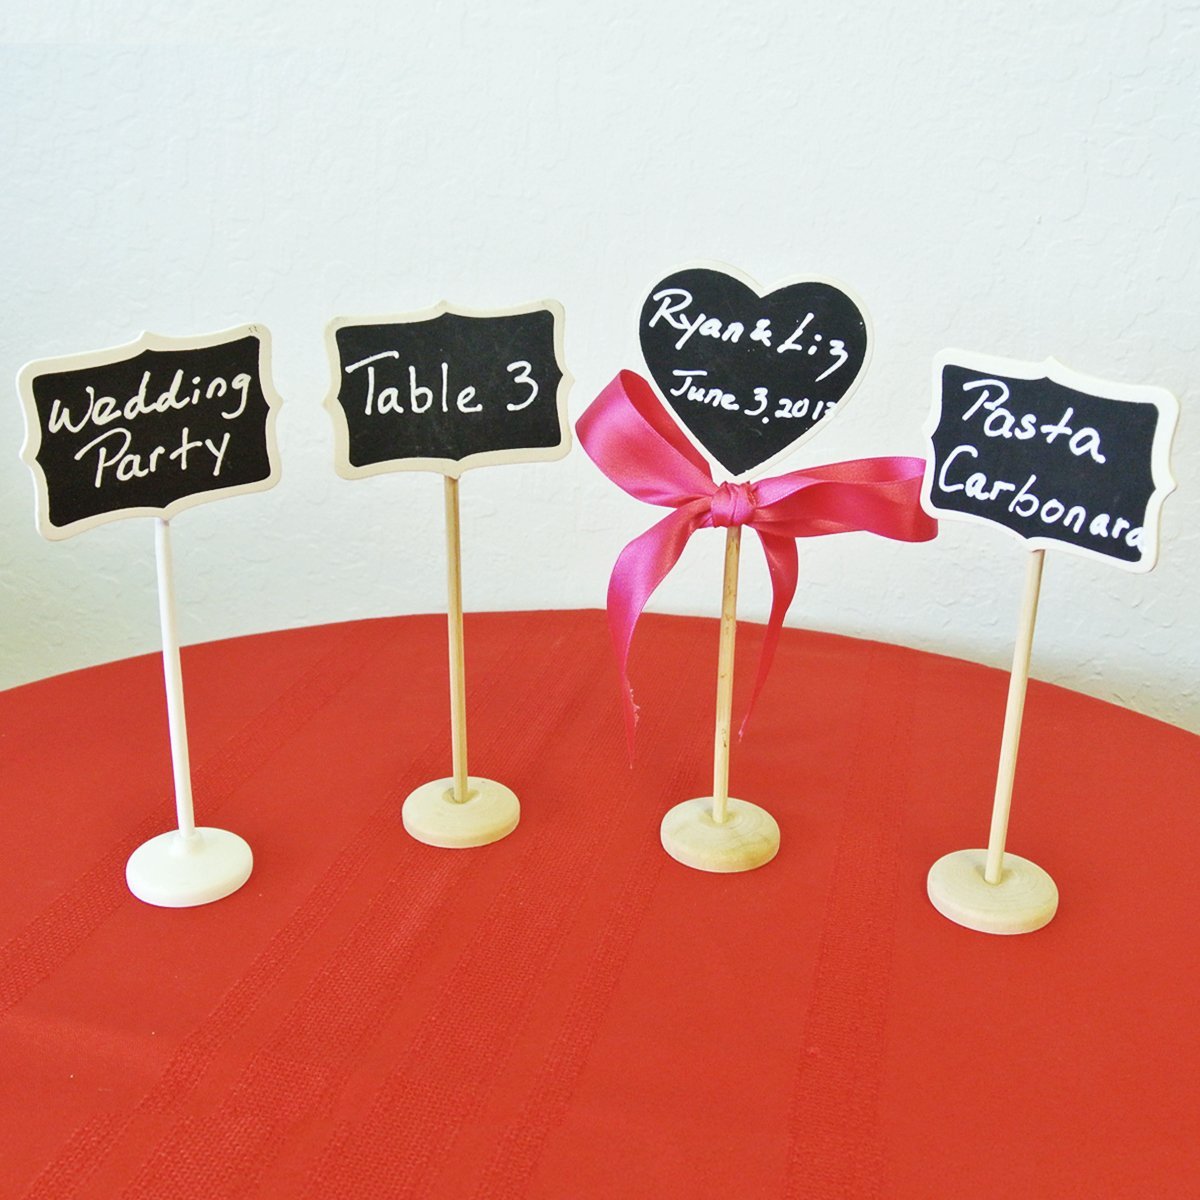 Set of 8 Chalkboard Stands With Chalkboard Stickers, 3" x 2" Rectangle